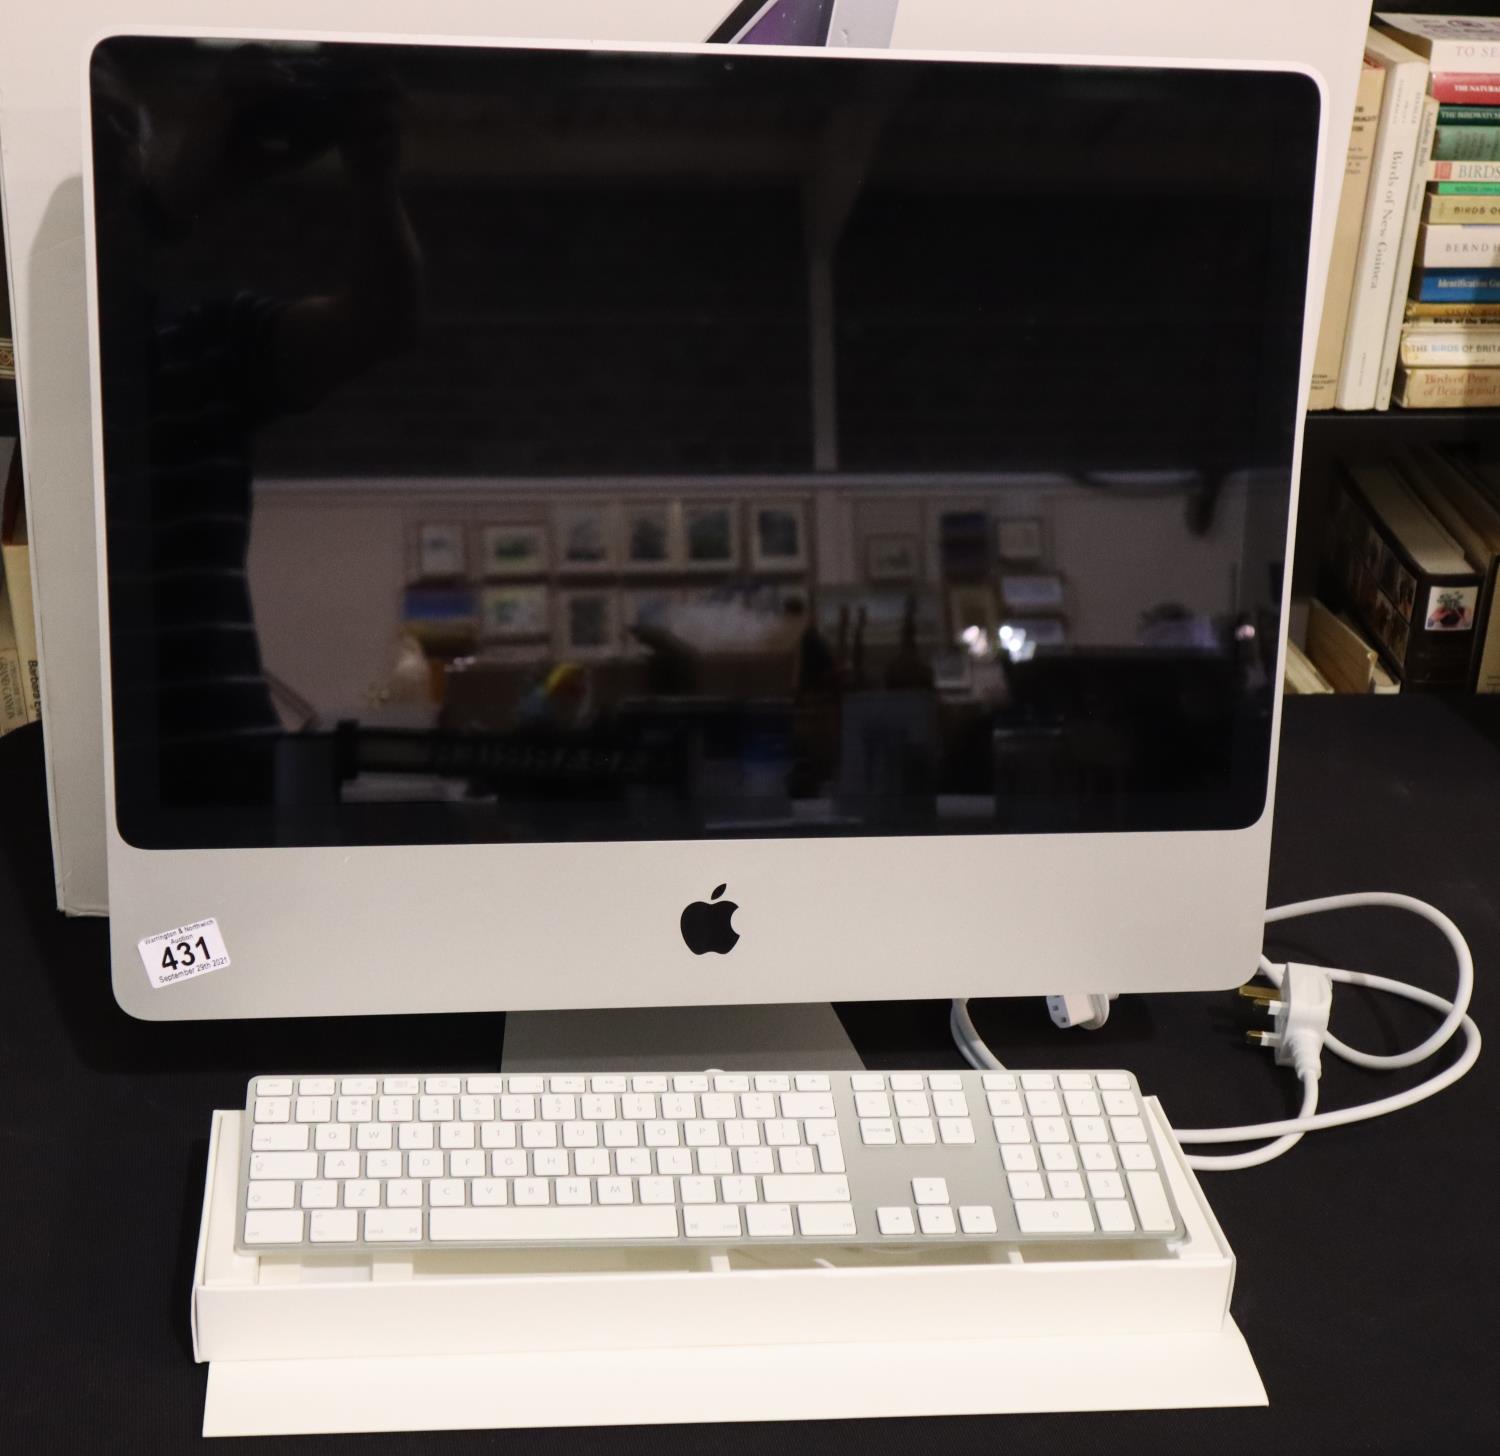 Apple iMac A1225 24 inch widescreen computer with keyboard, untested. Not available for in-house P&